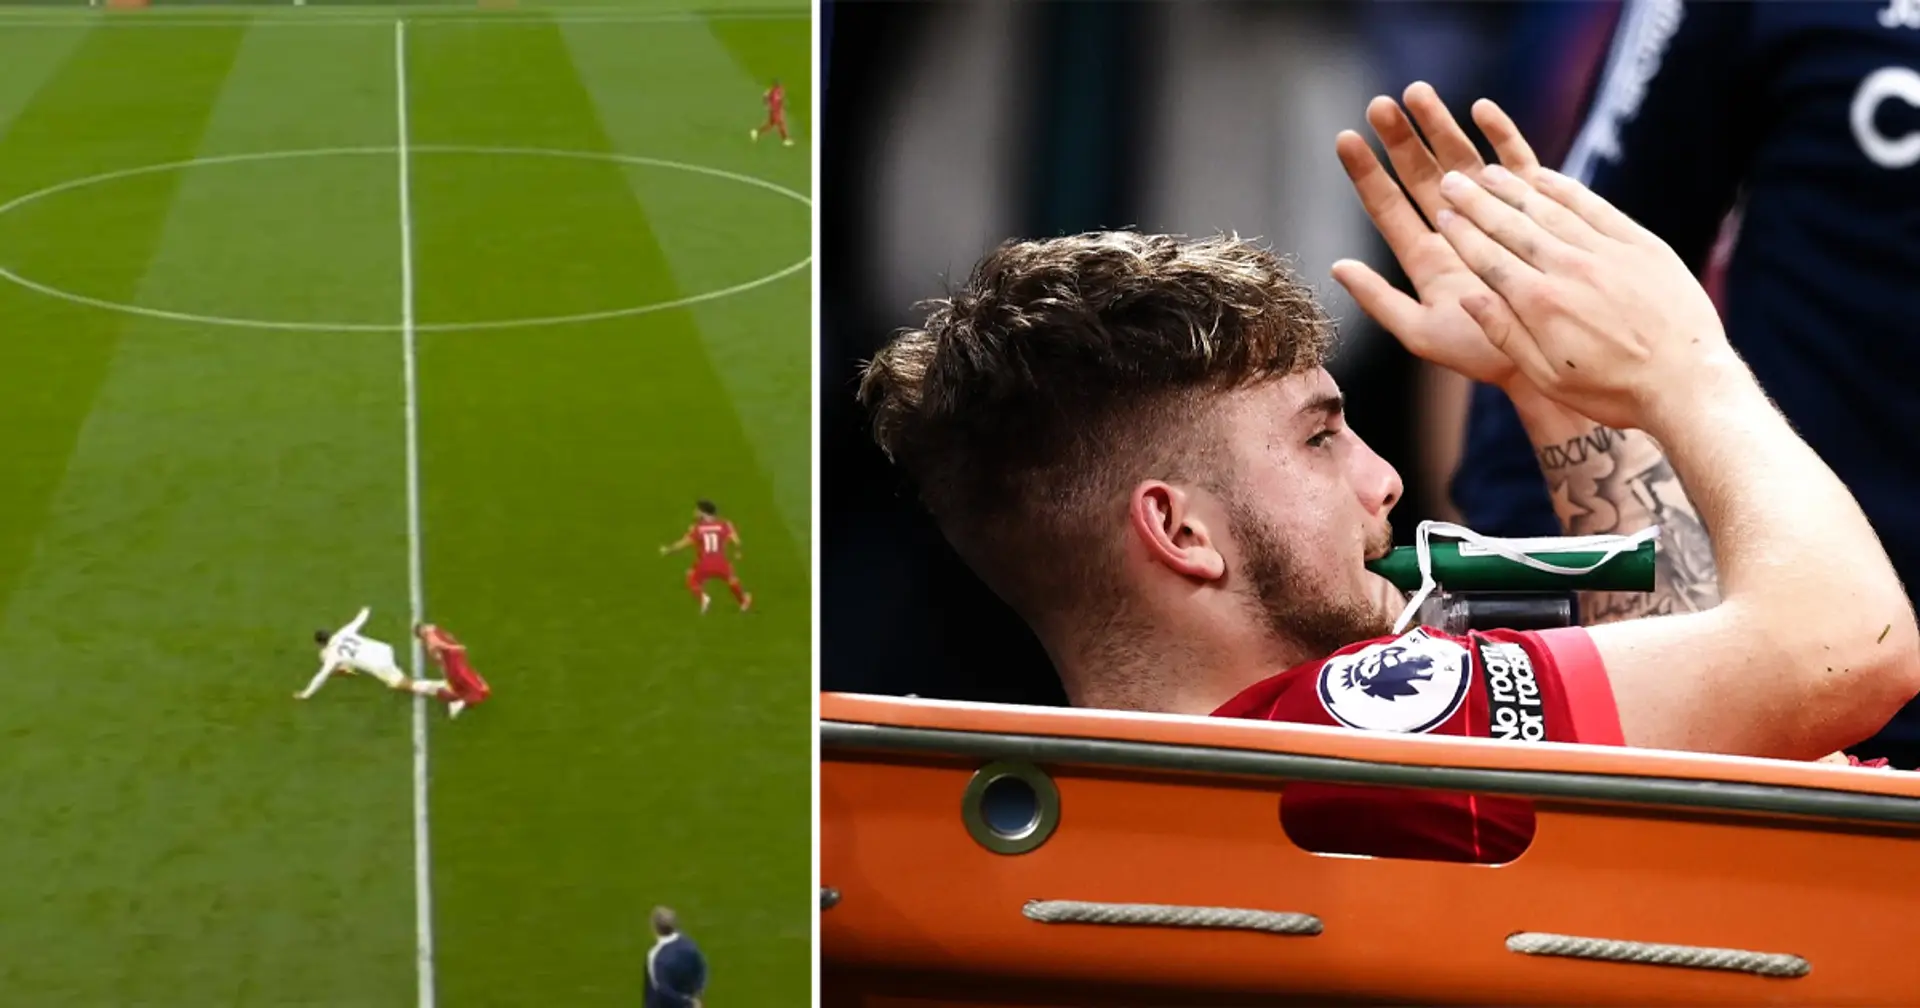 Liverpool youngster Harvey Elliott suffers serious injury, takes on oxygen while being carried off pitch